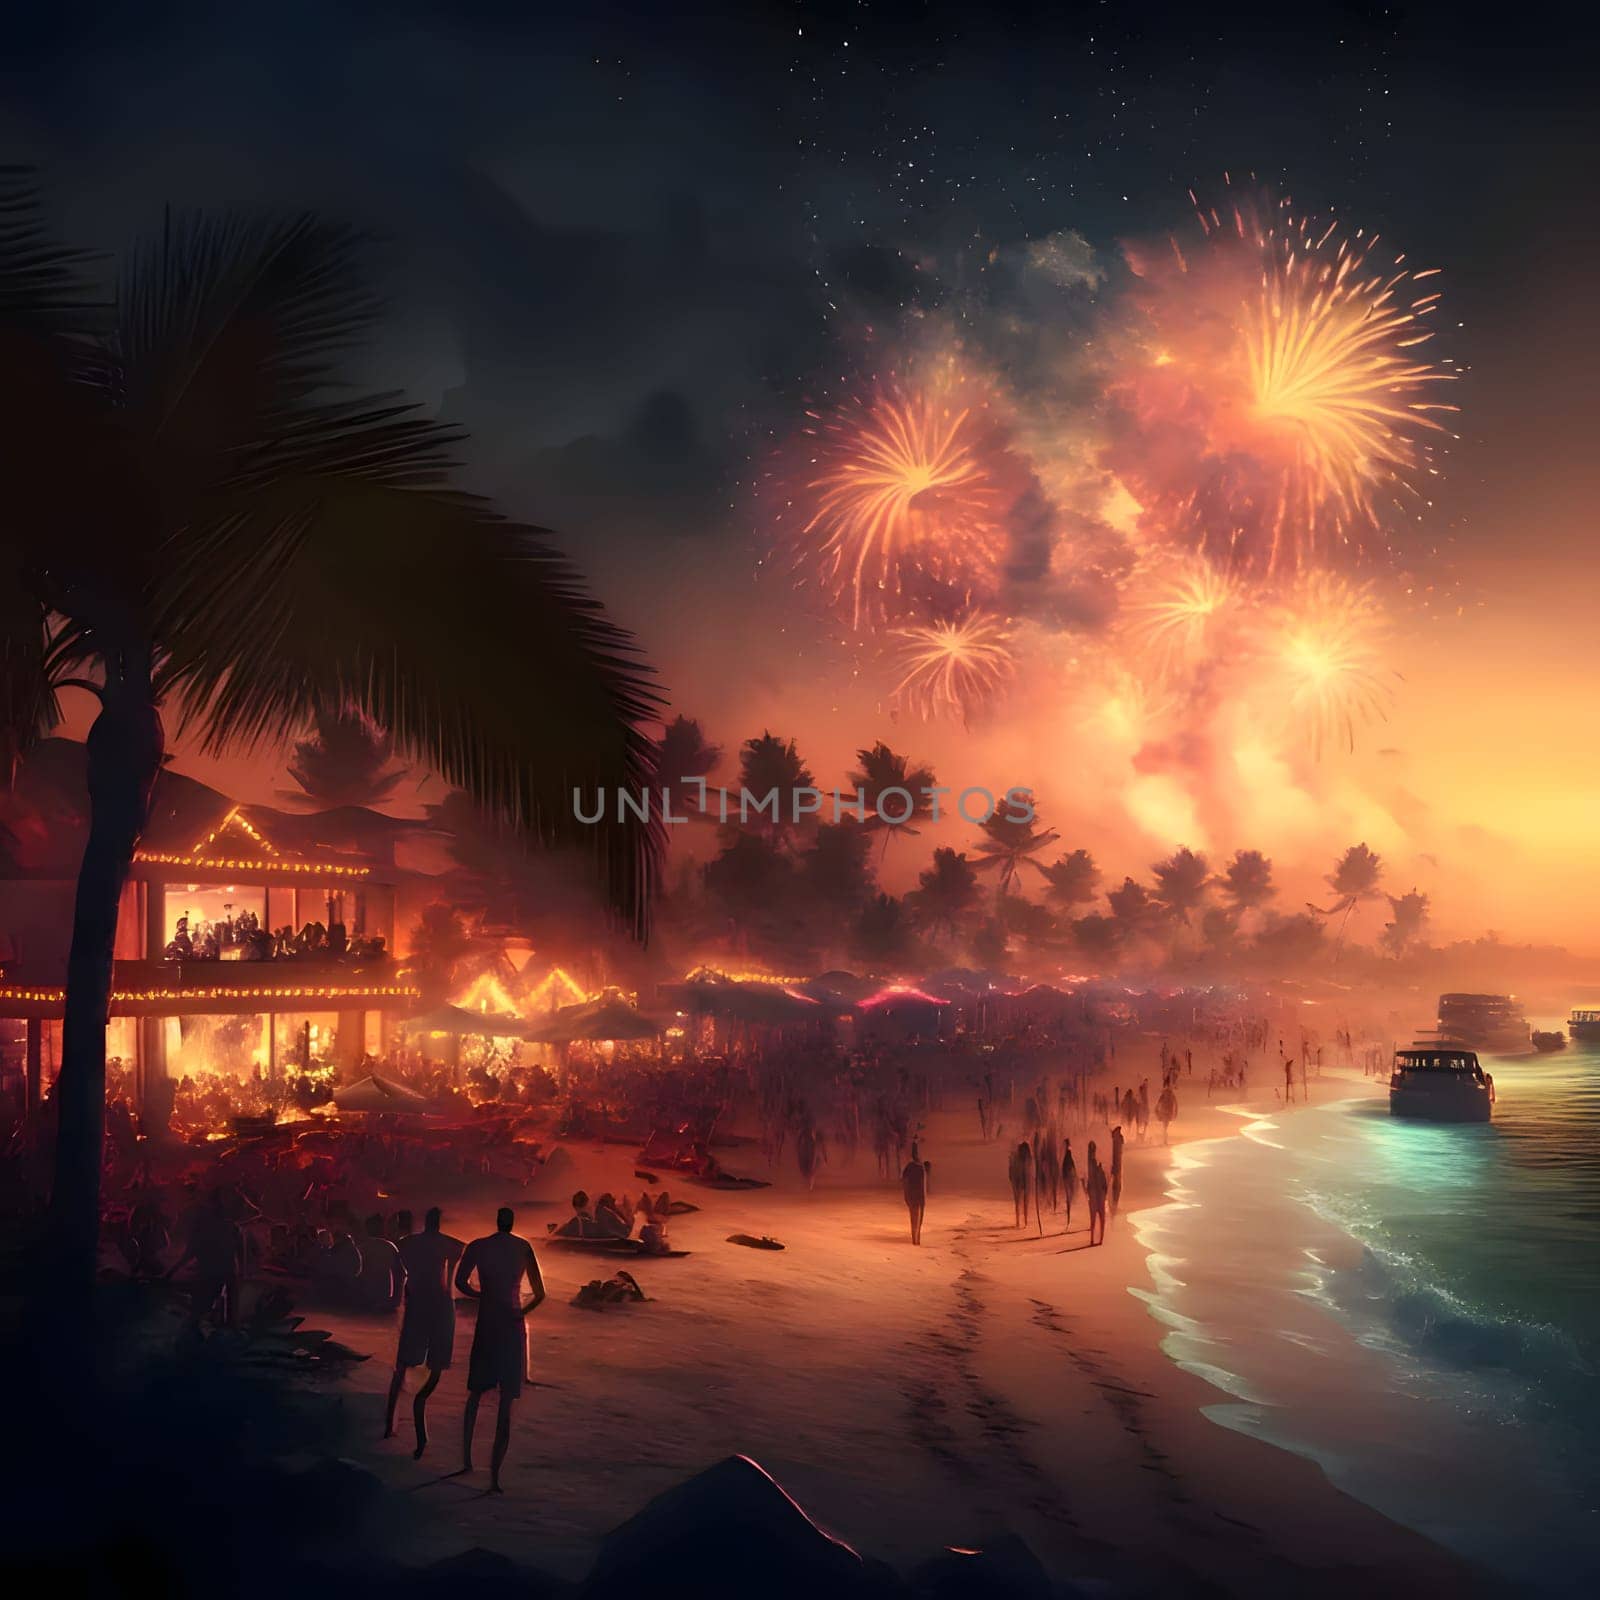 Illustration of locals watching a fireworks show on the beach. New Year's fun and festivities. by ThemesS